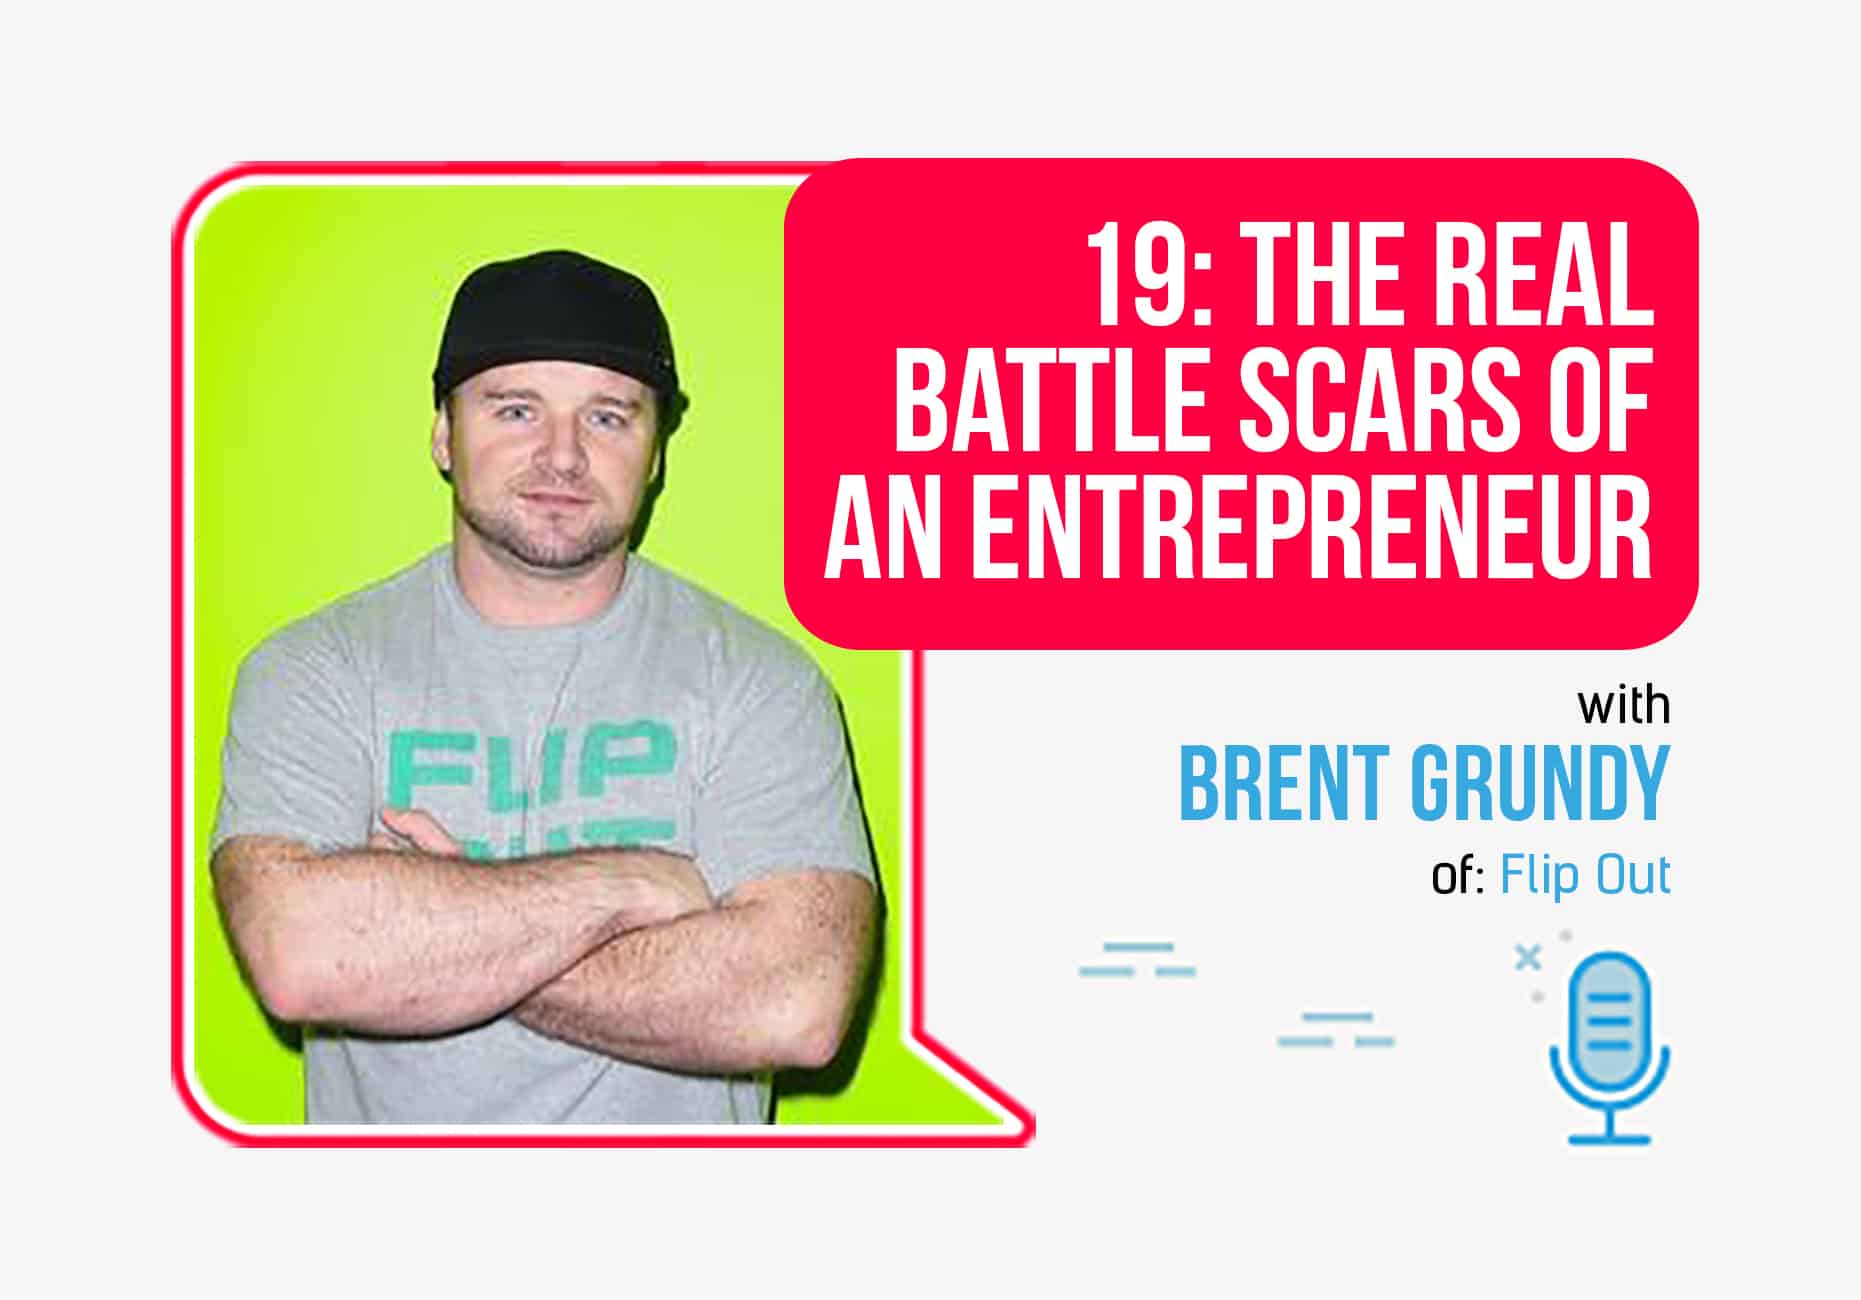 FLIP OUT founder Brent Grundy on the Scars of an ... - 1861 x 1300 jpeg 479kB